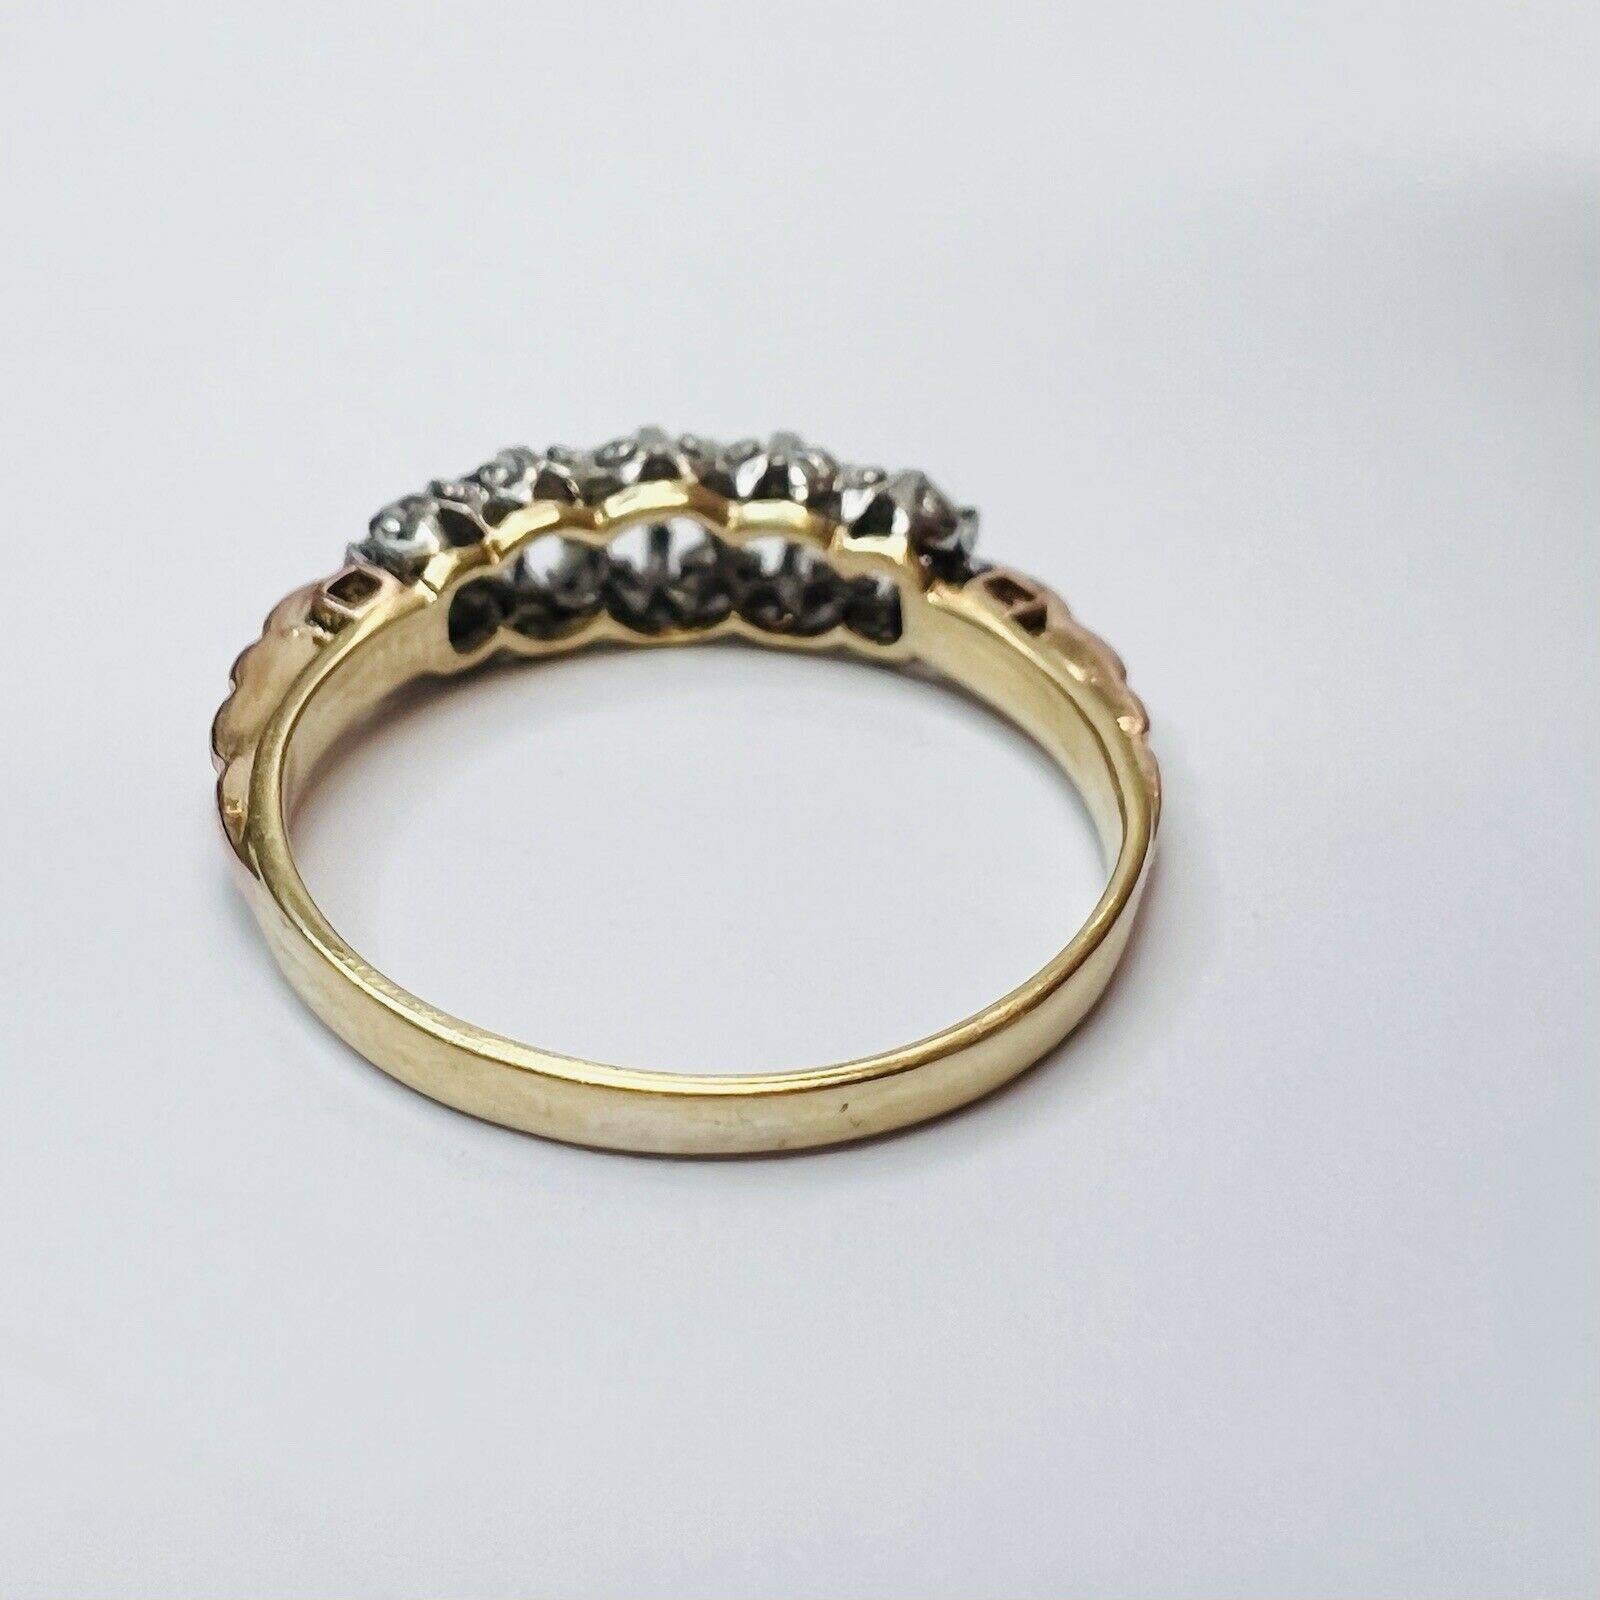 Edwardian Ring Solid 18K Yellow Gold and Platinum Set Diamond Band In Excellent Condition For Sale In Addison, TX